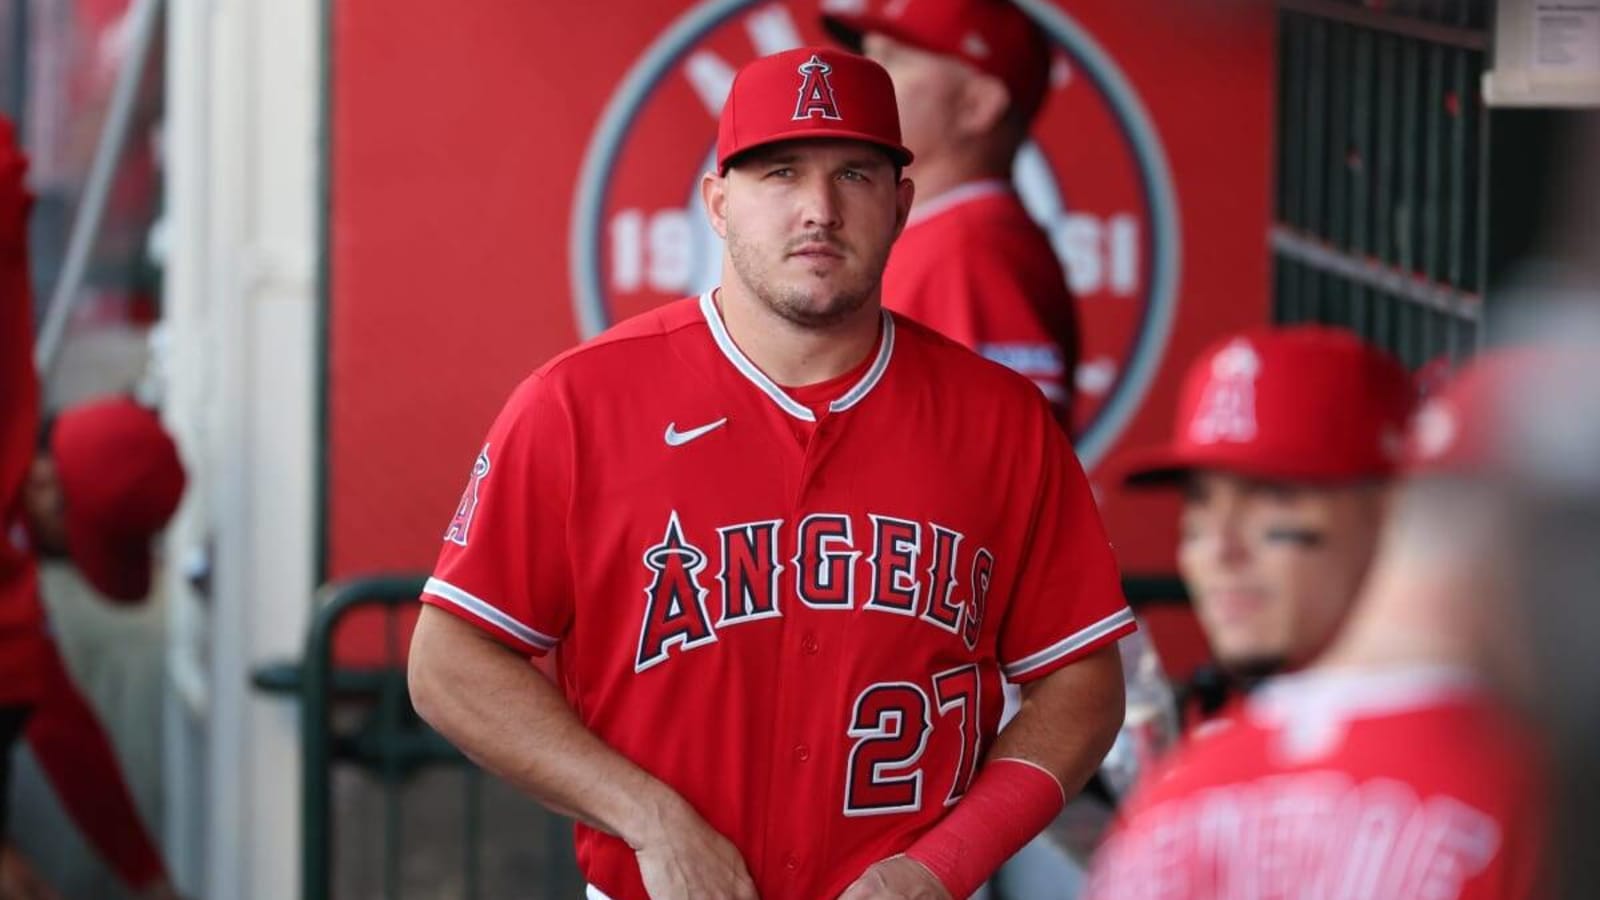  MLB Analyst Compares Mike Trout to Hall of Famer Ted Williams